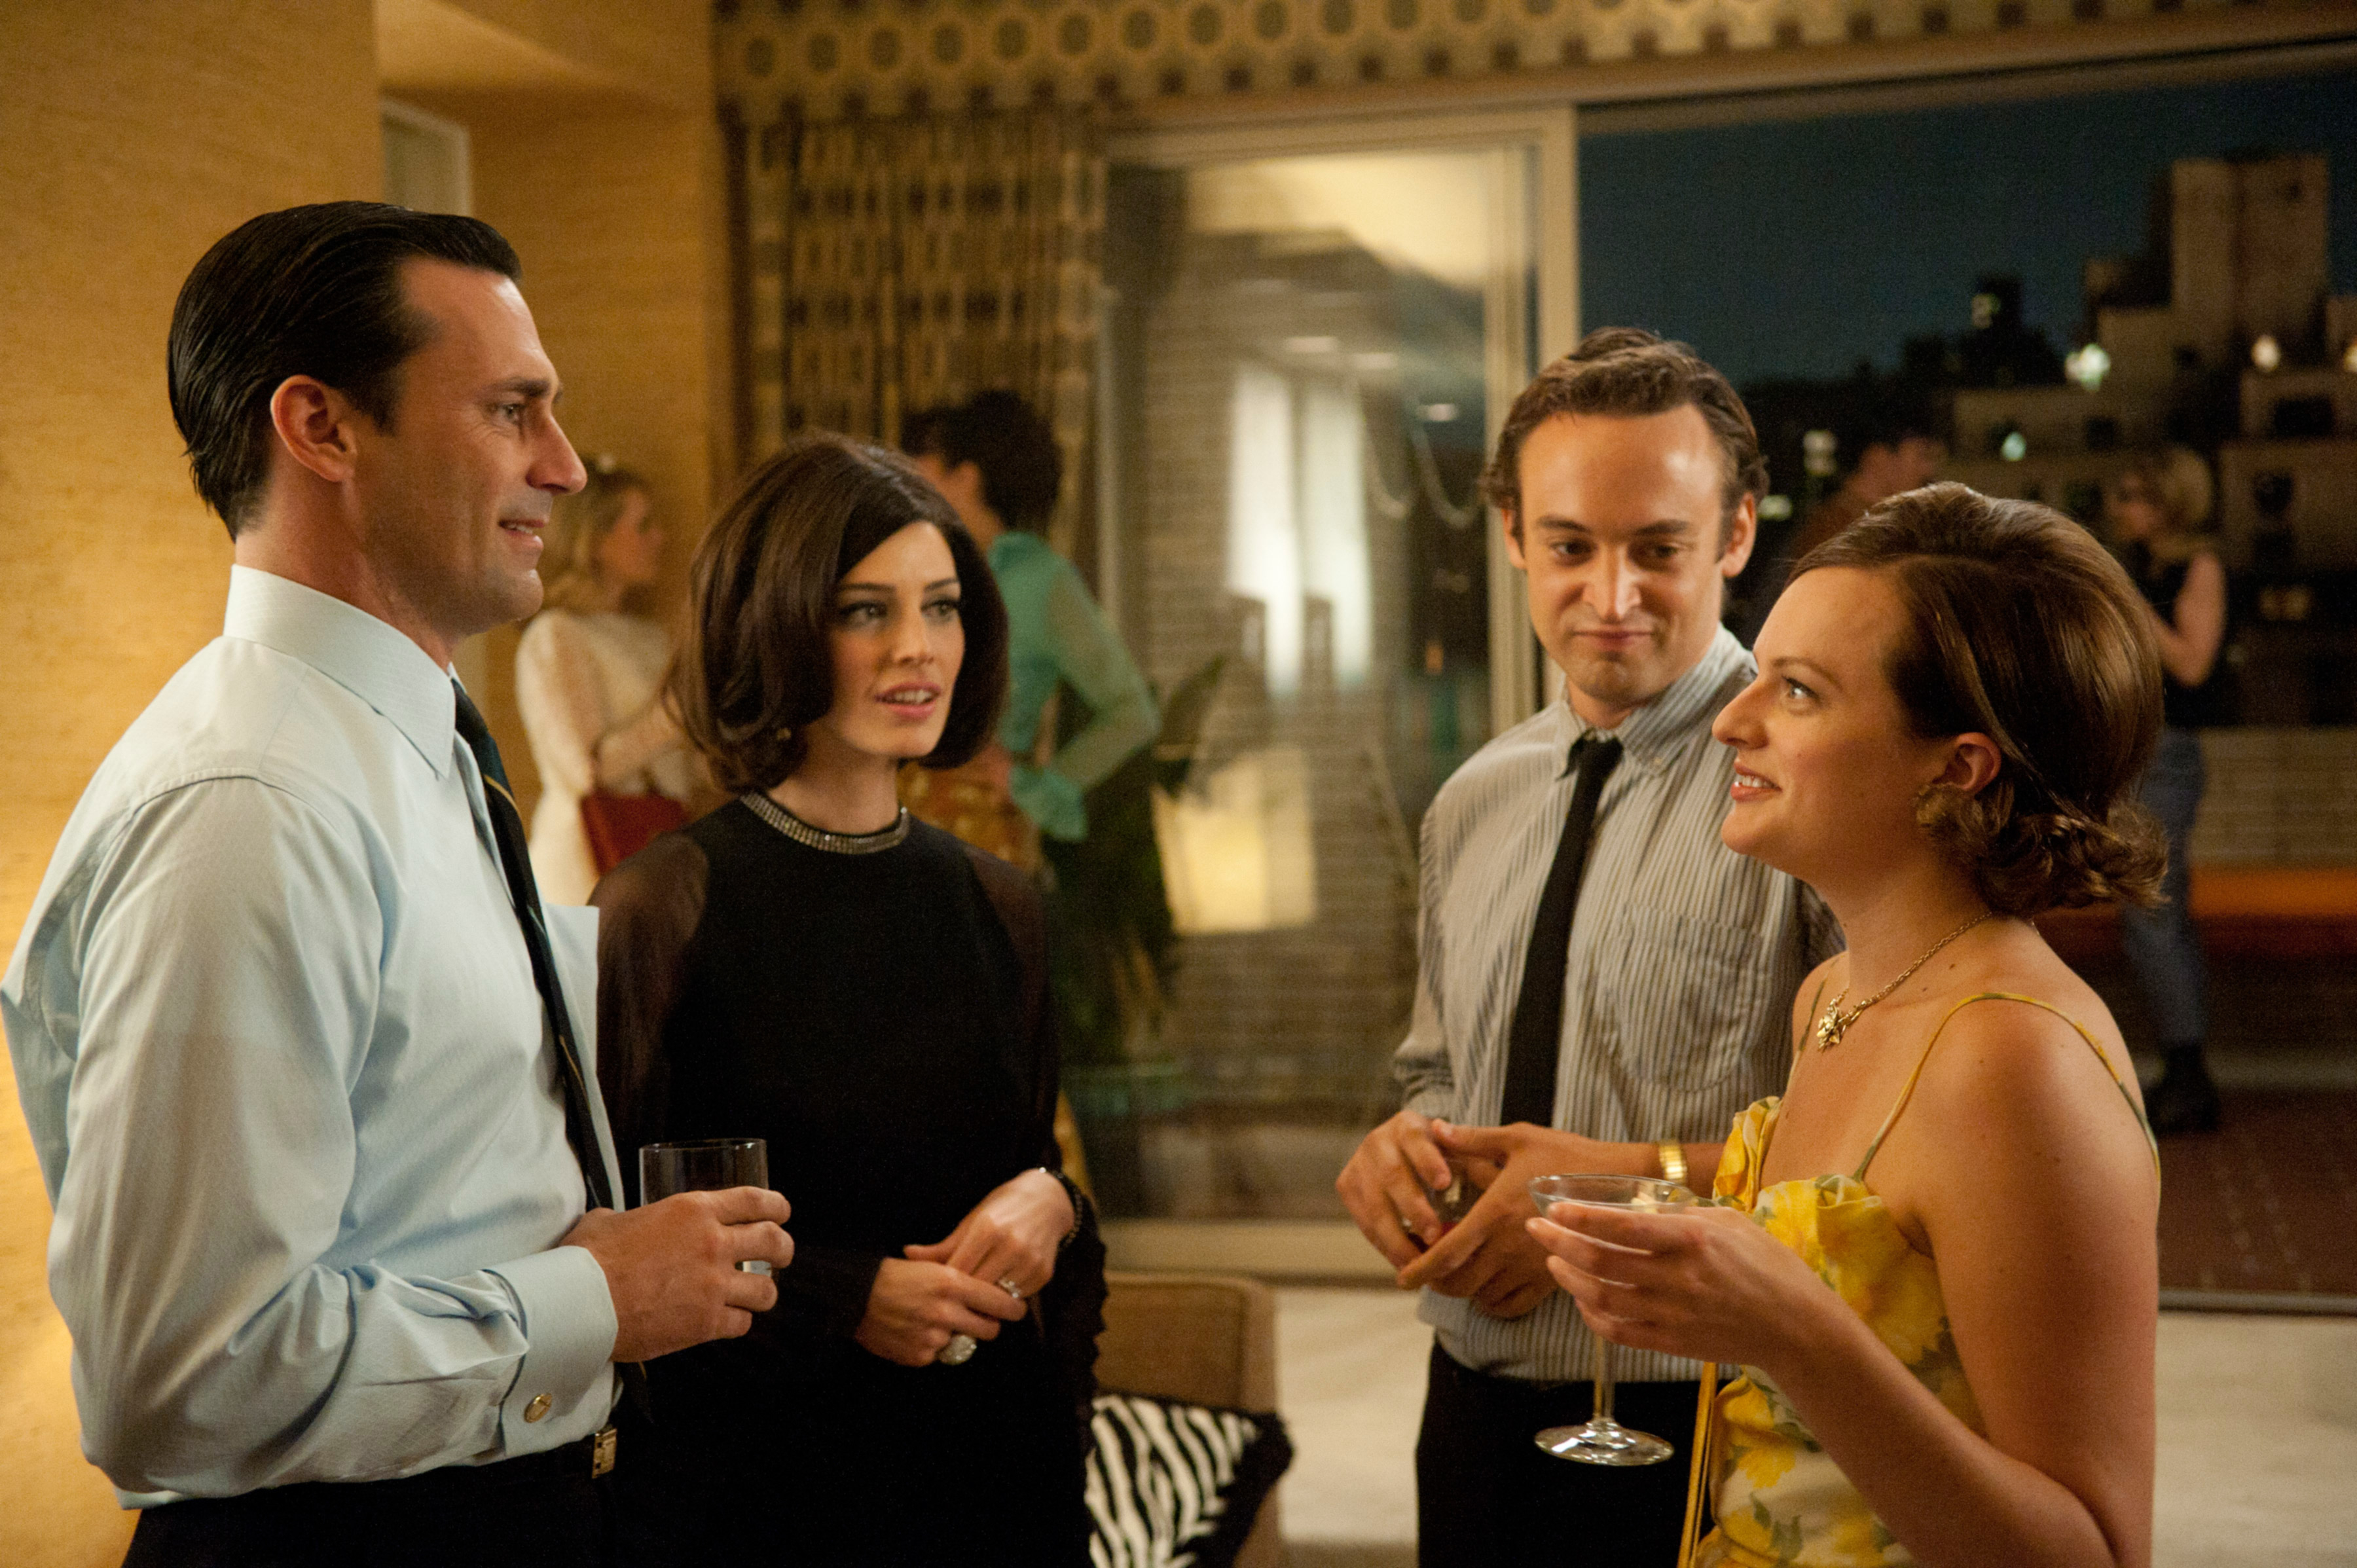 Four characters from a TV show in a social gathering, holding drinks and conversing